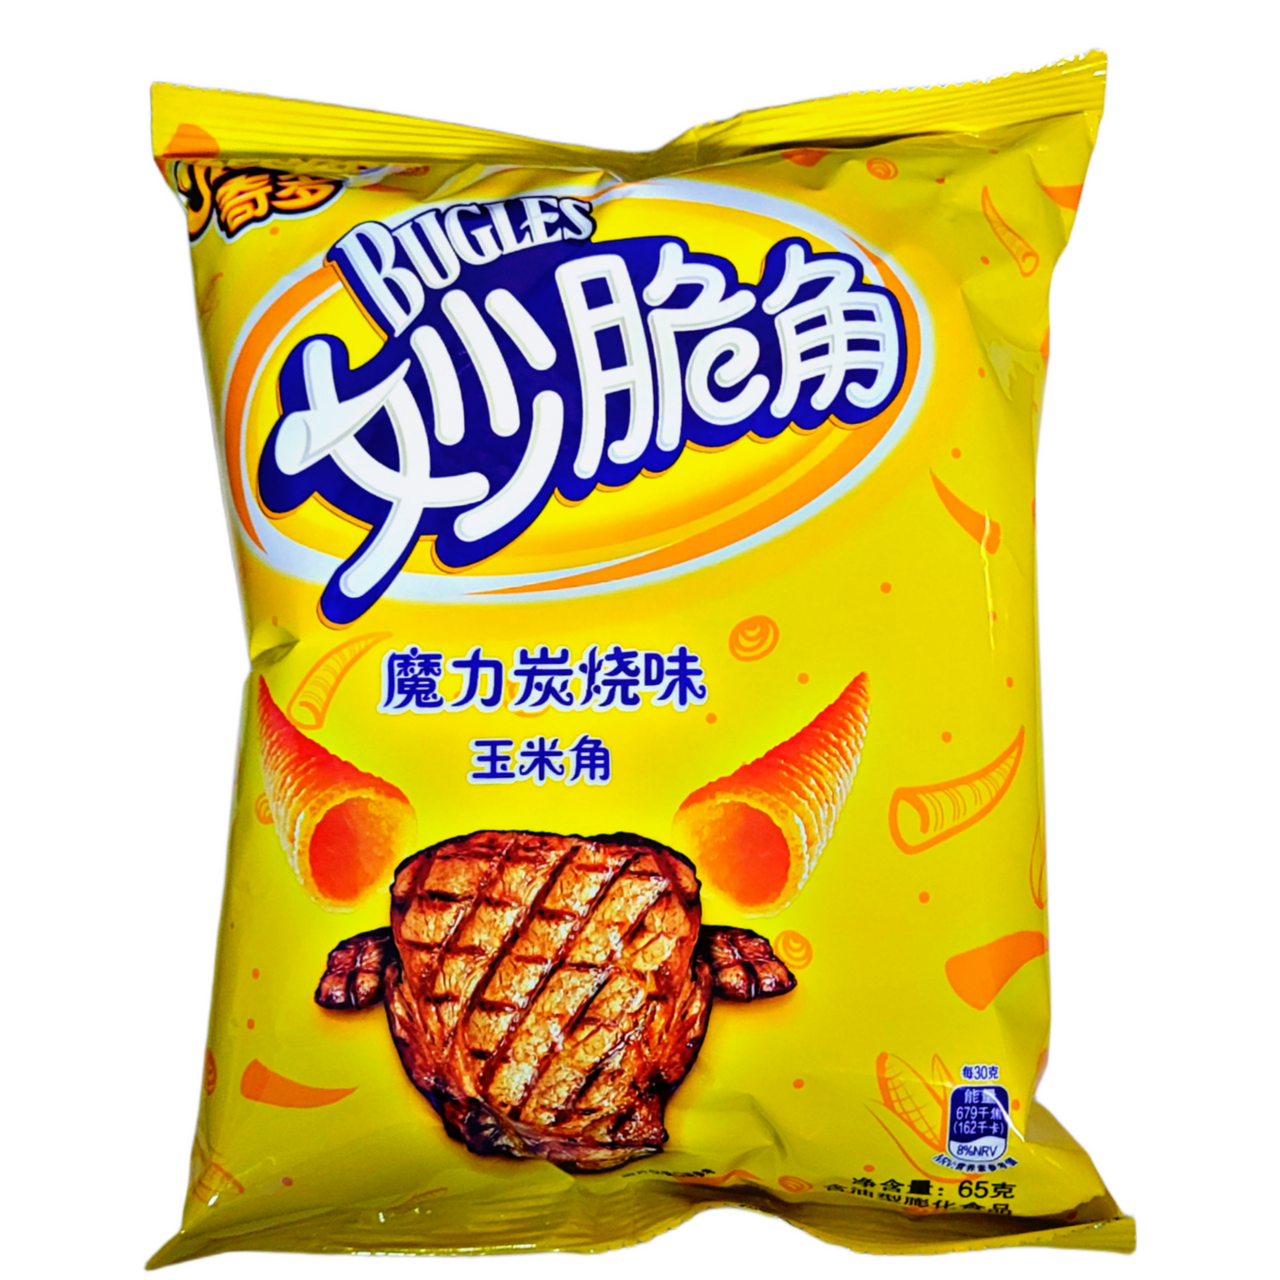 Frito Lay - Bugles - Steak Flavor - Product Of China